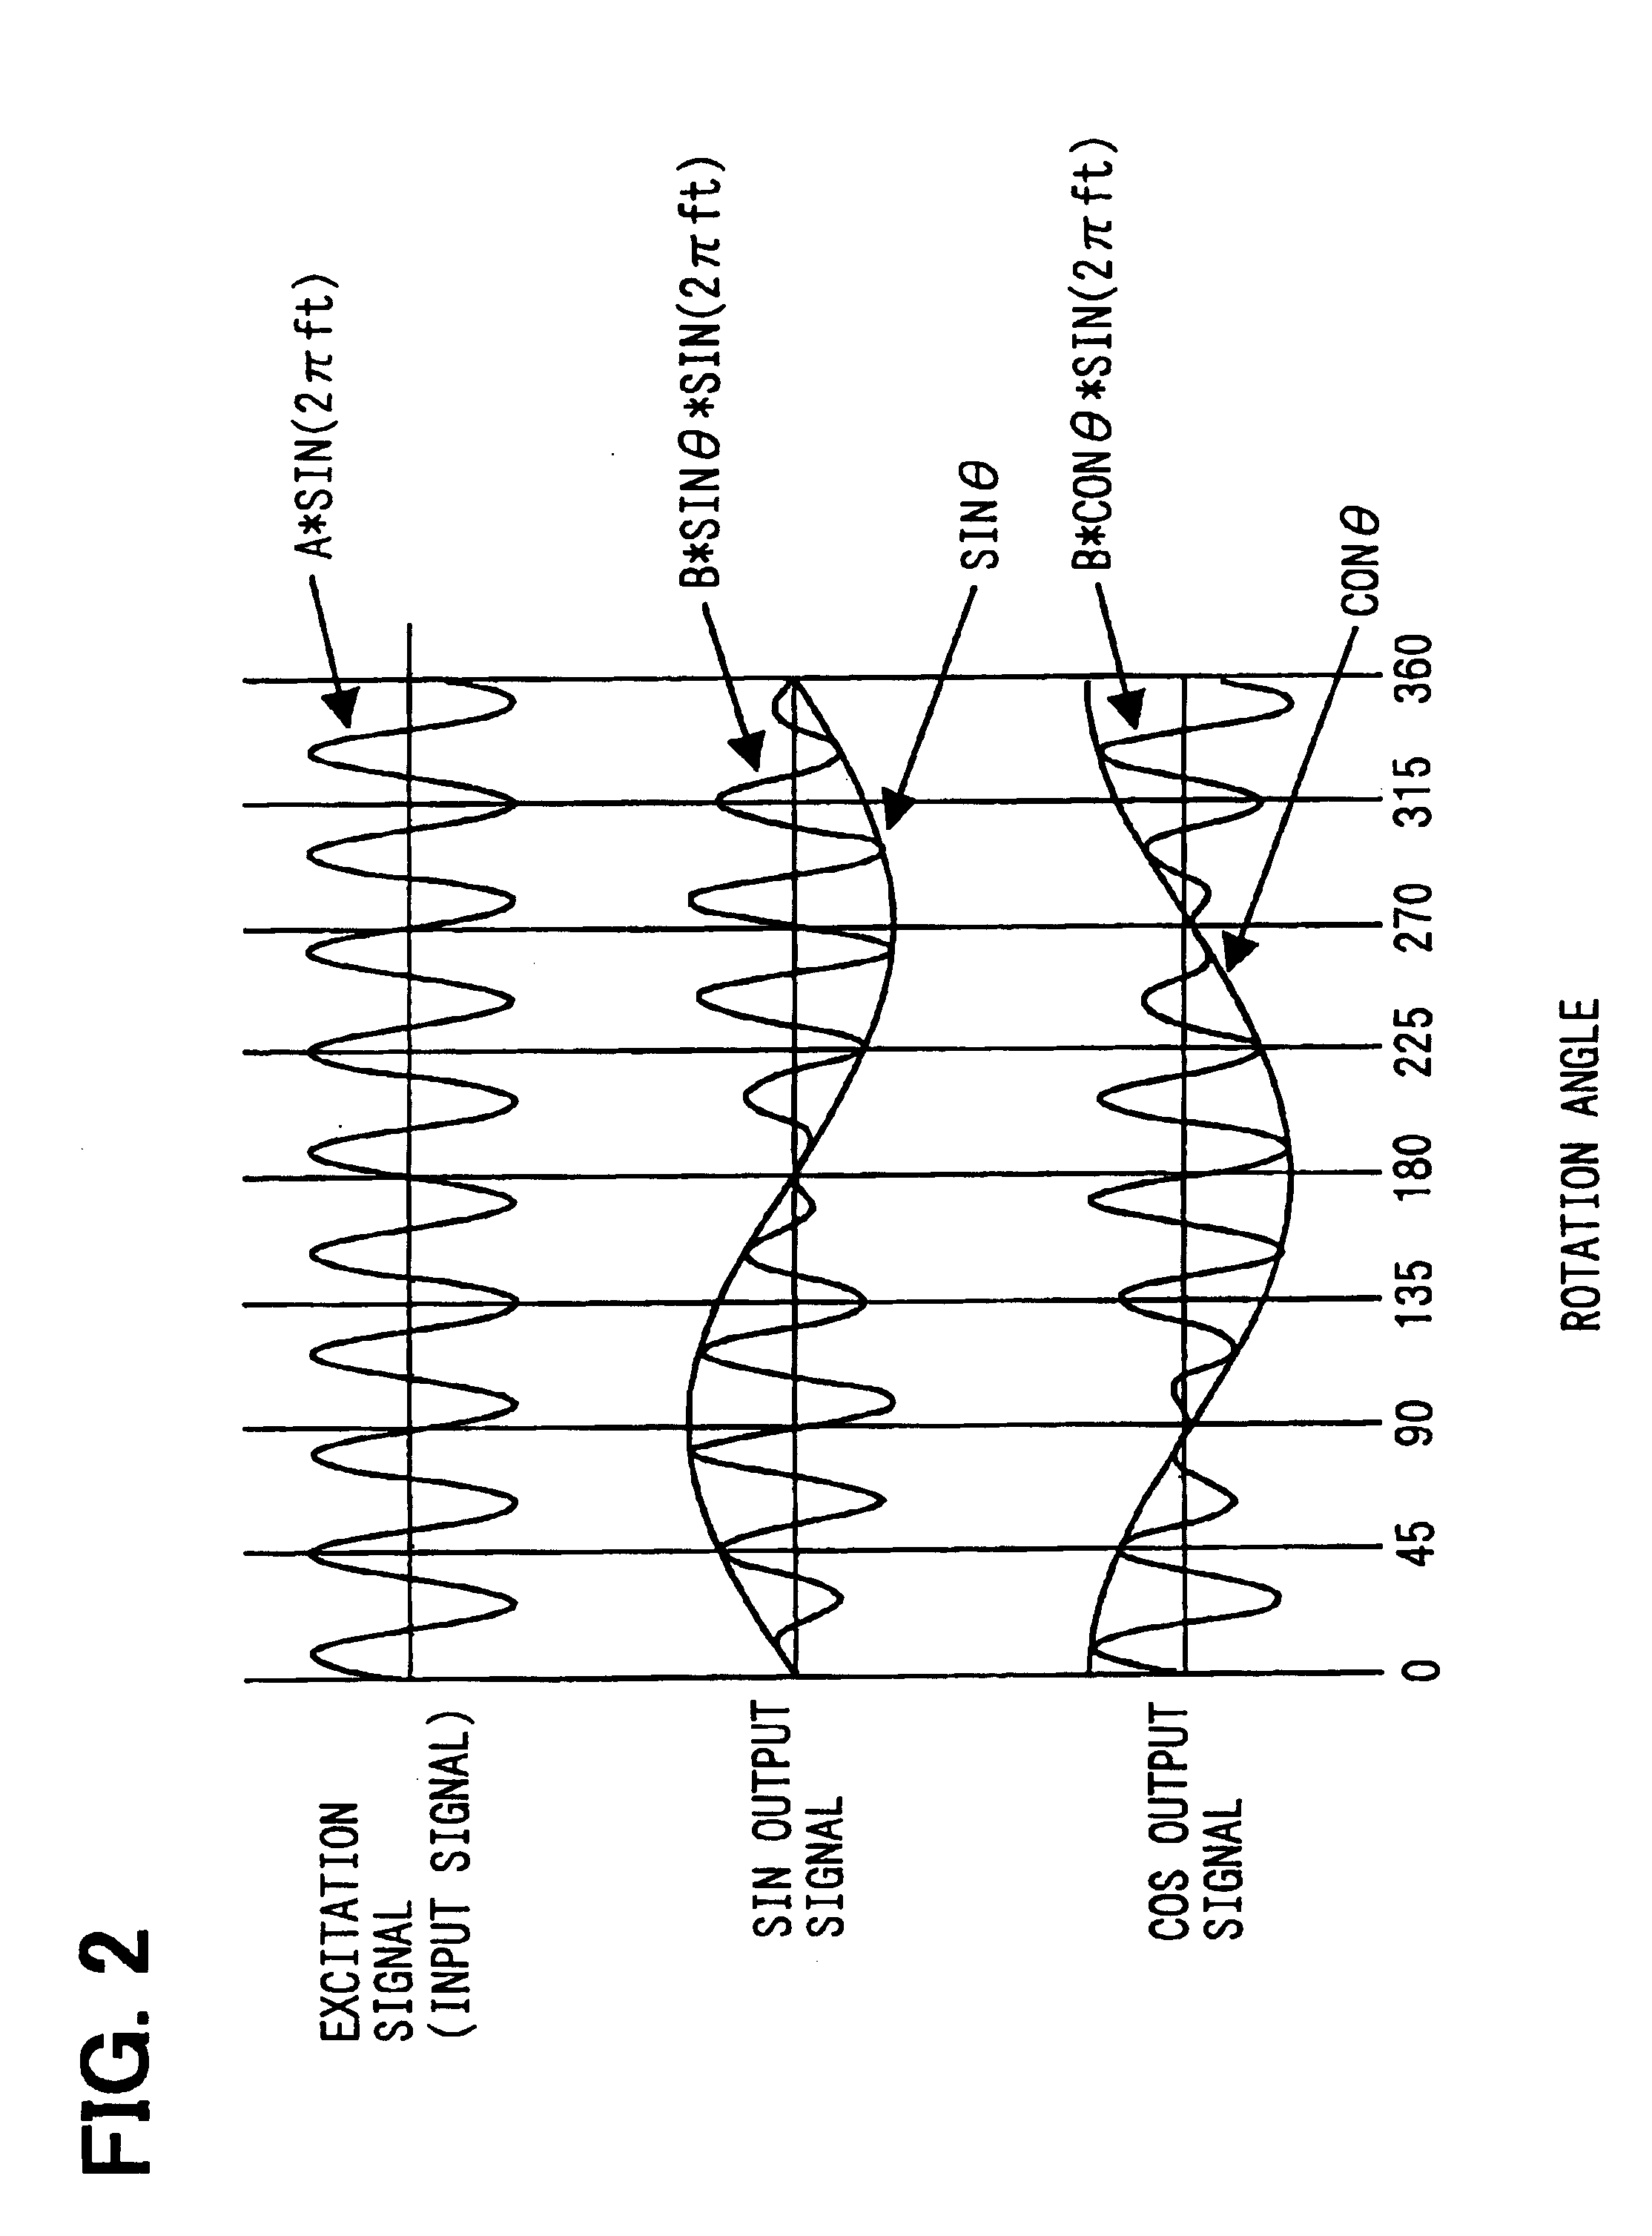 Method and apparatus for correcting resolver output